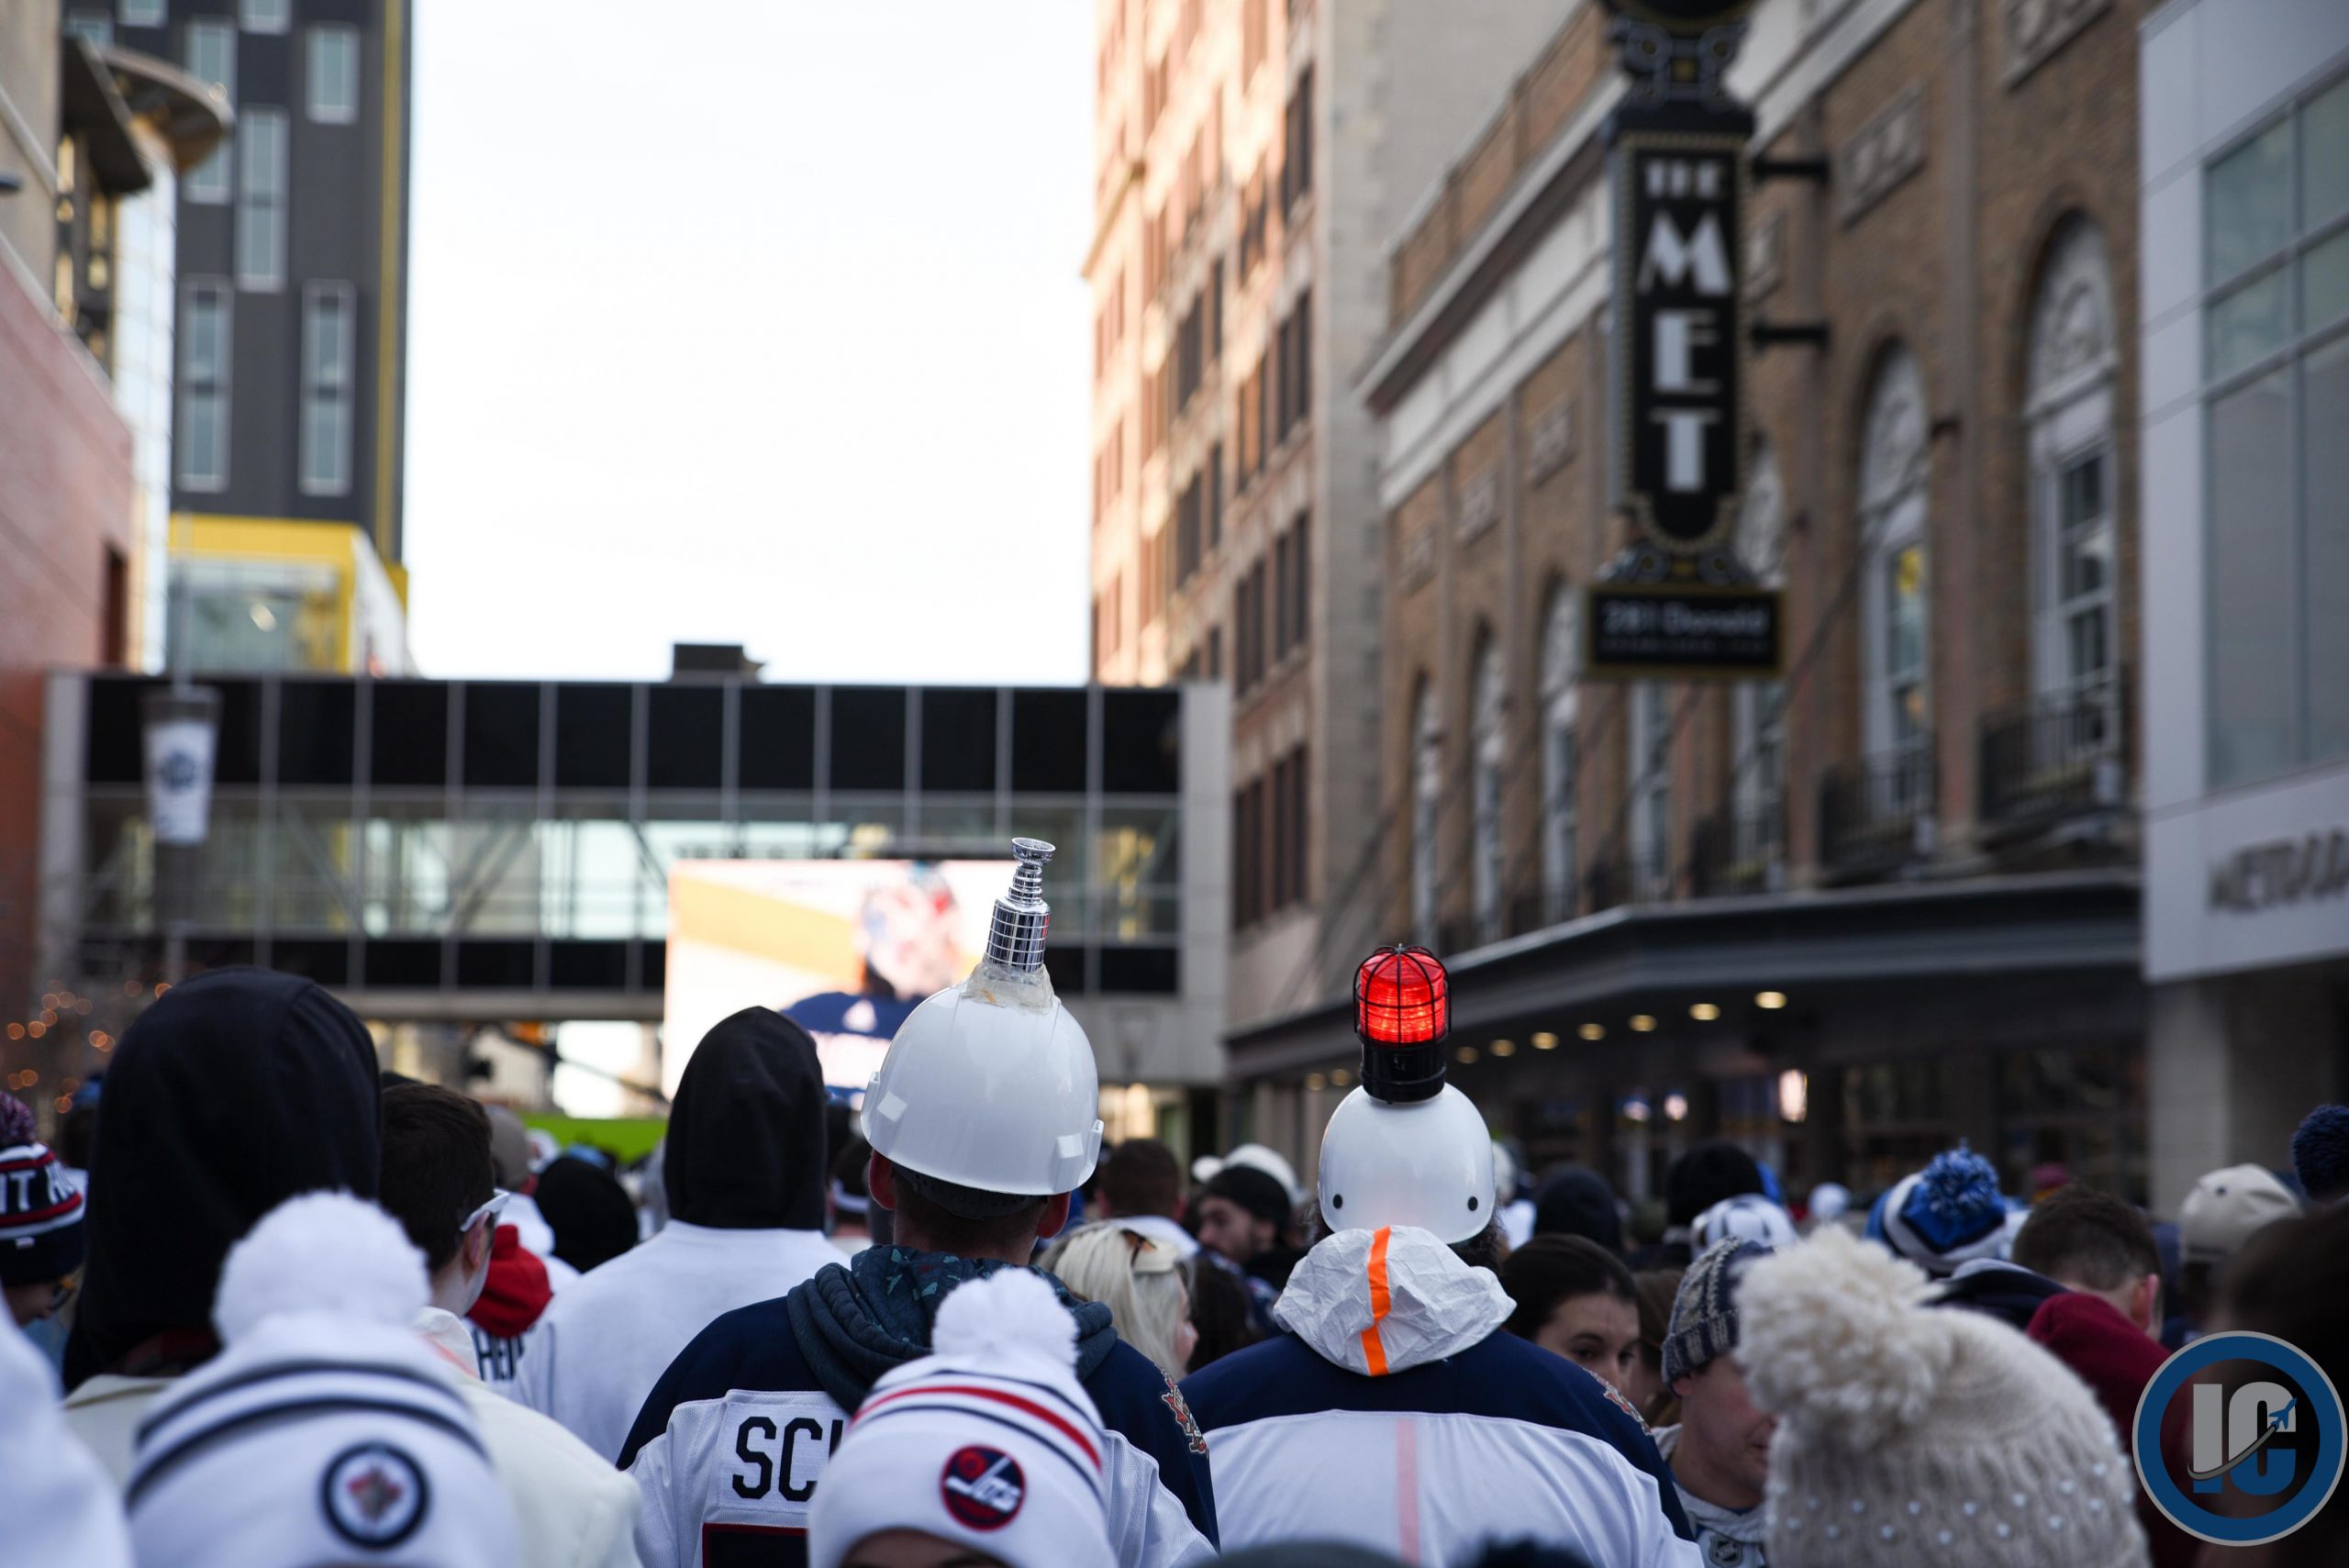 Fans at Whiteout Street Party scaled